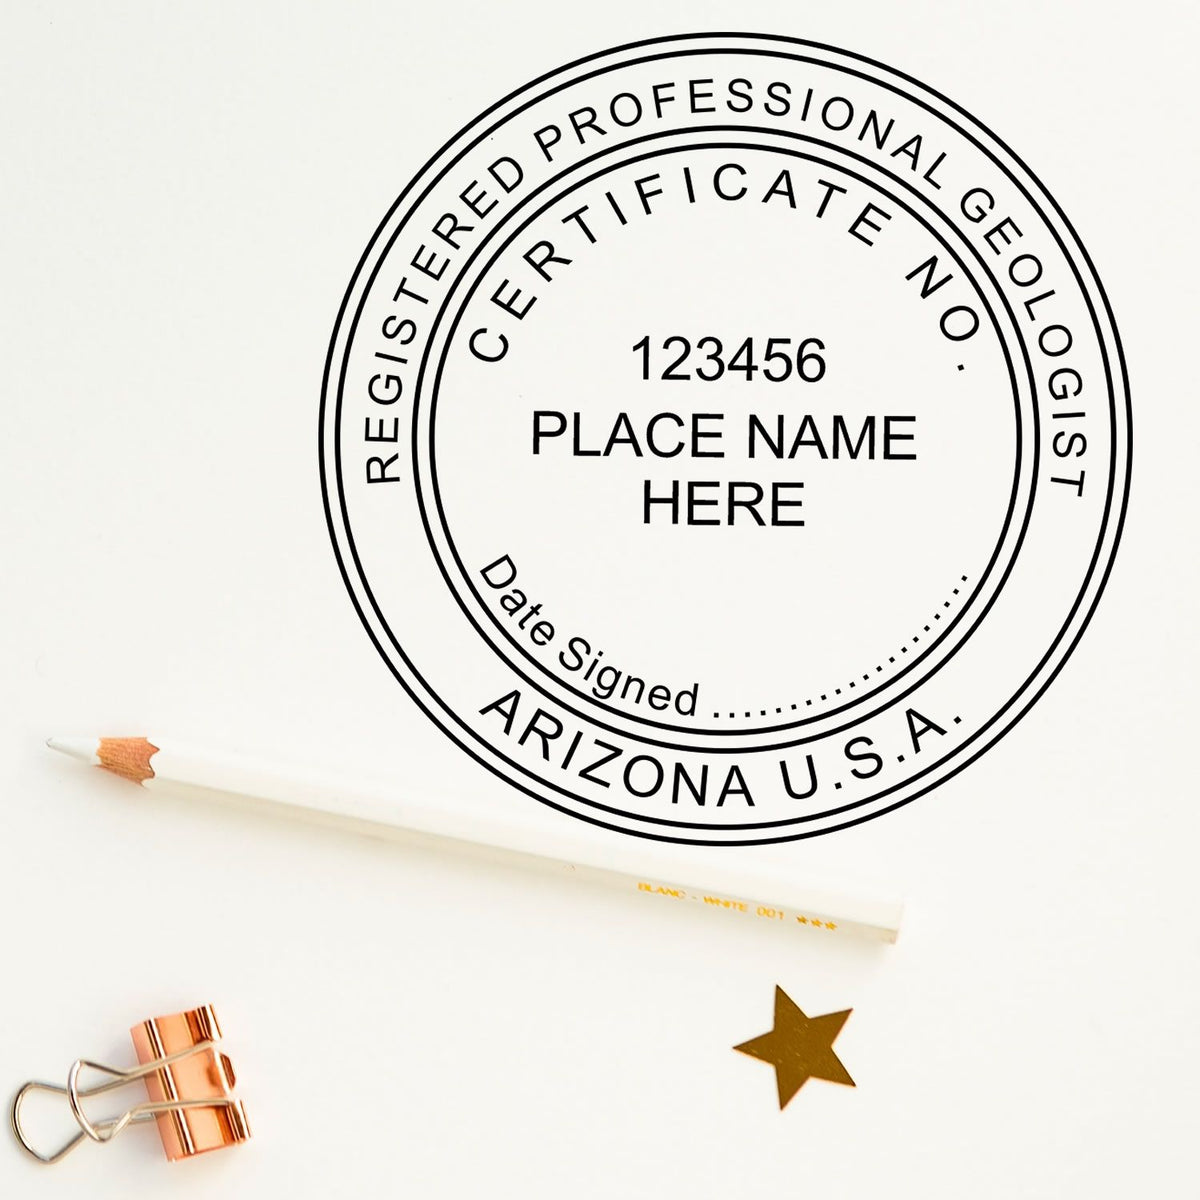 The Arizona Professional Geologist Seal Stamp stamp impression comes to life with a crisp, detailed image stamped on paper - showcasing true professional quality.